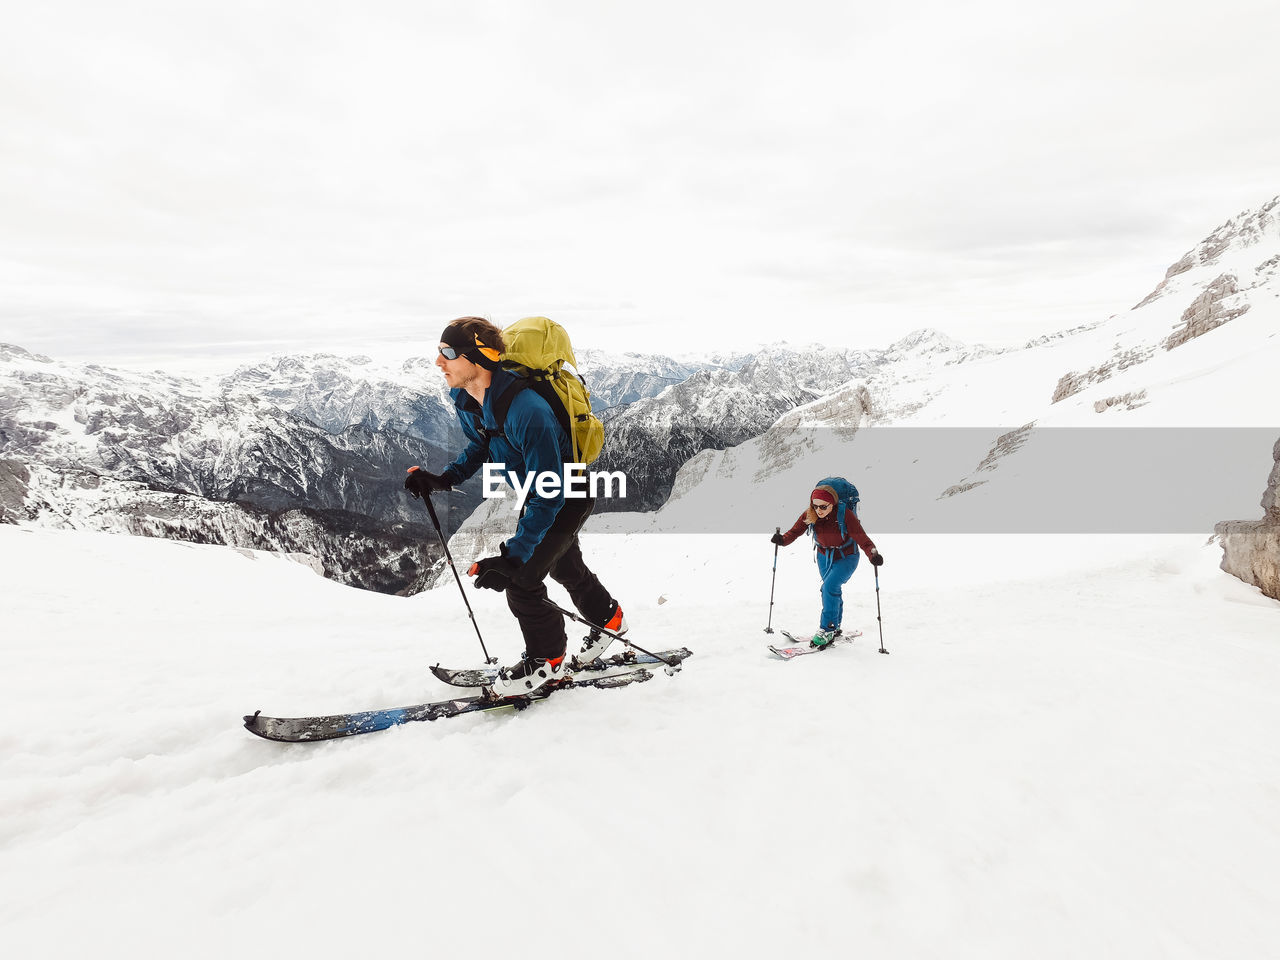 low angle view of man skiing on snow